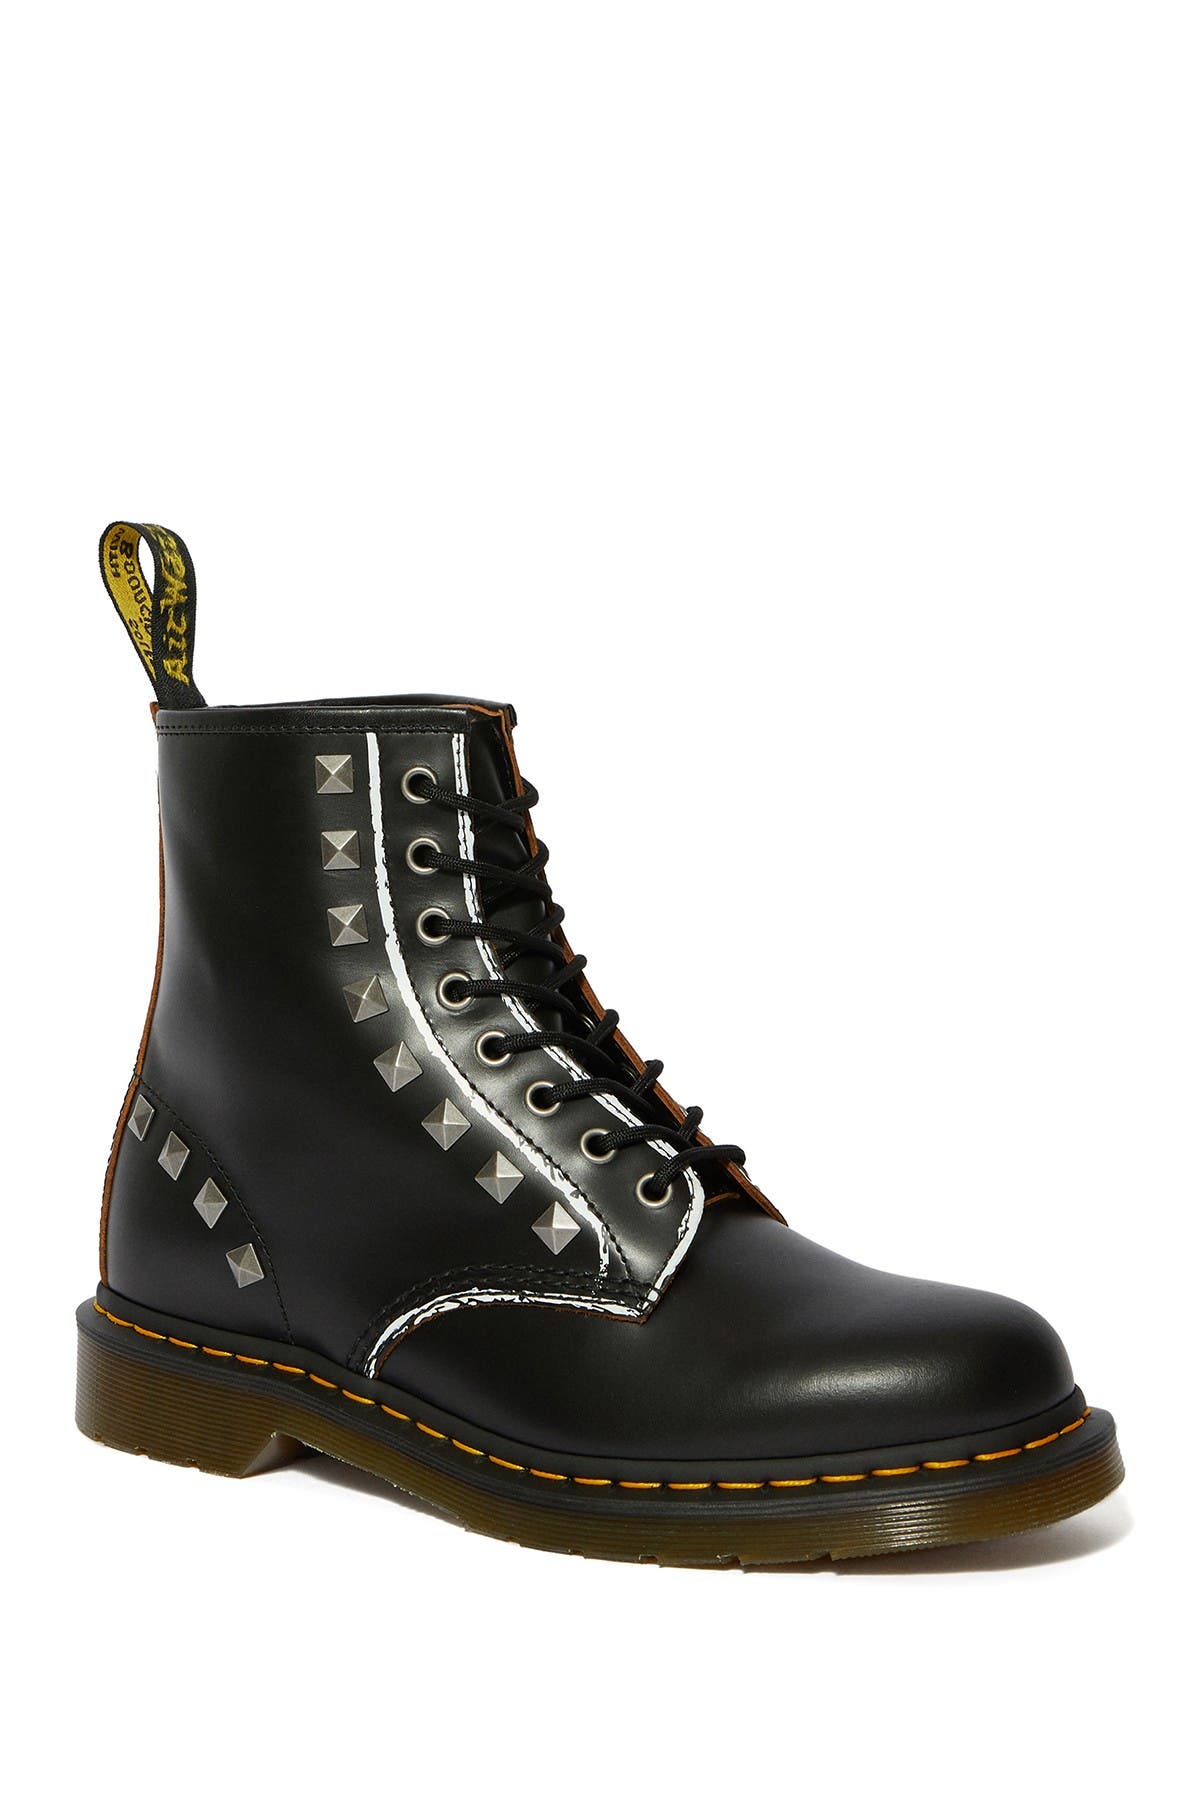 dr martens boots clearance